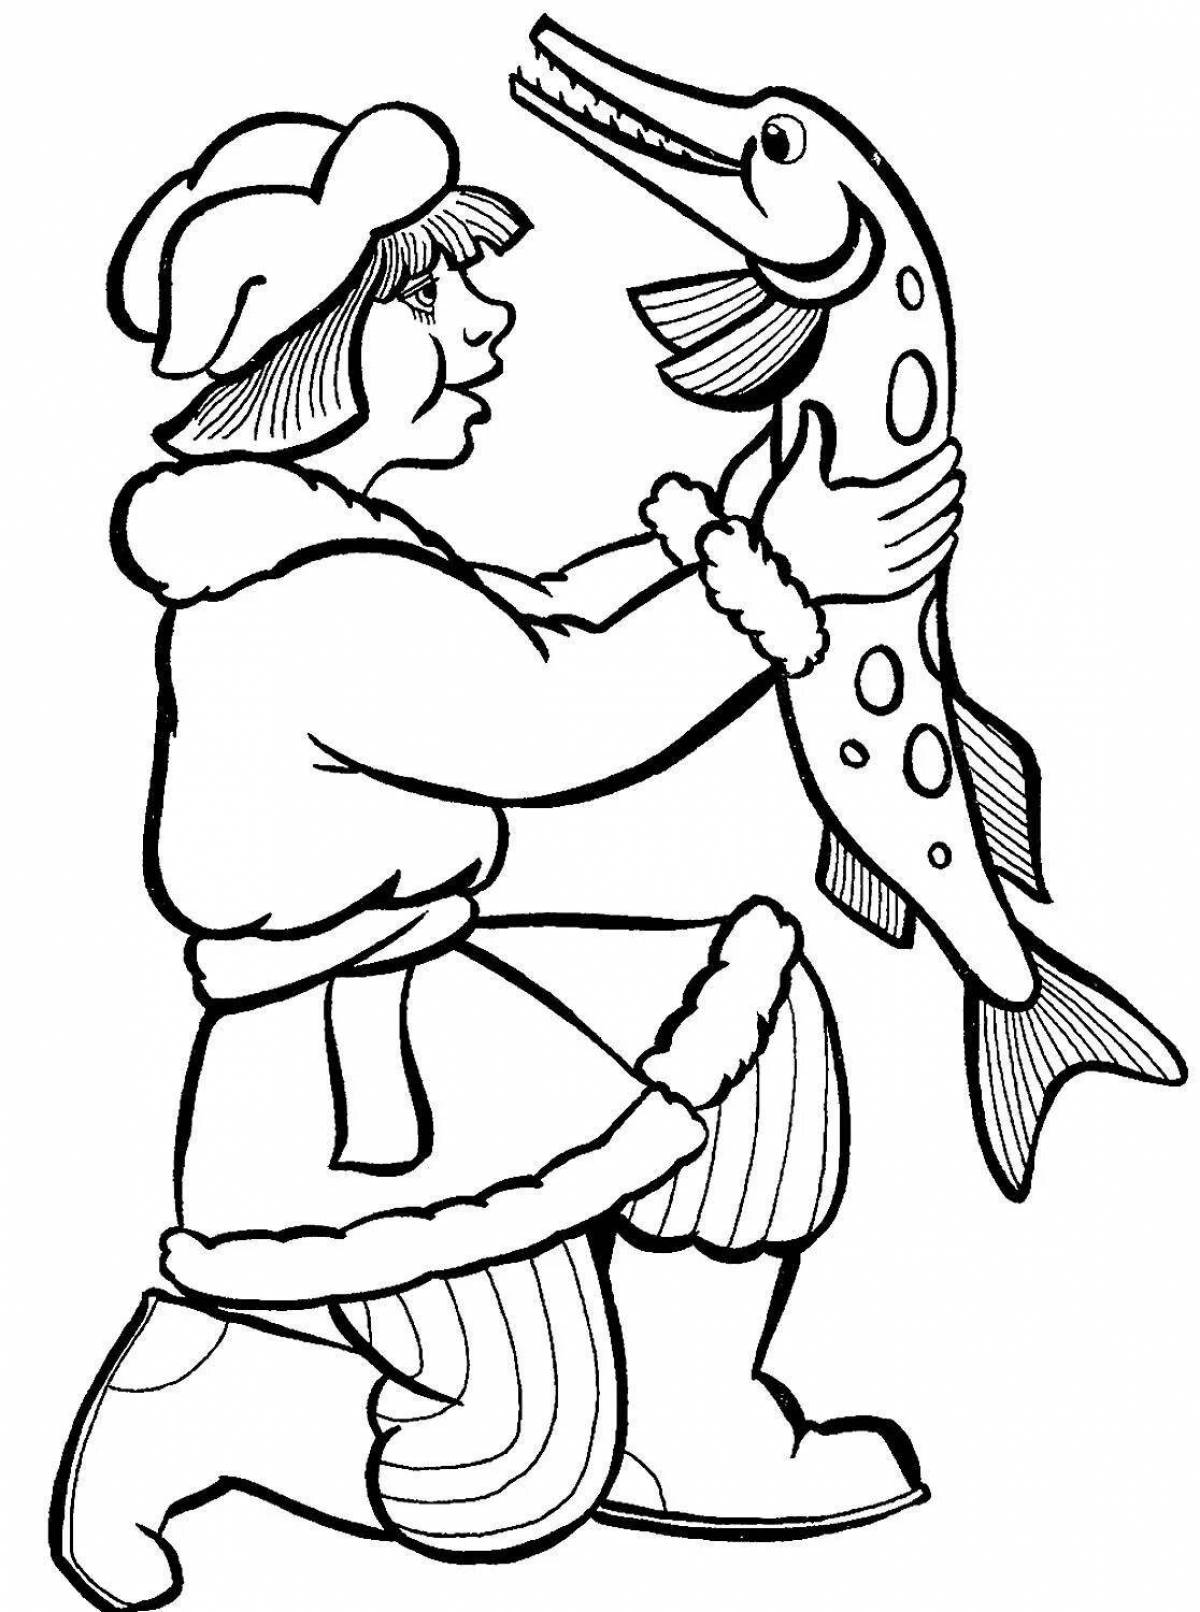 Coloring page dazzling pike and emela